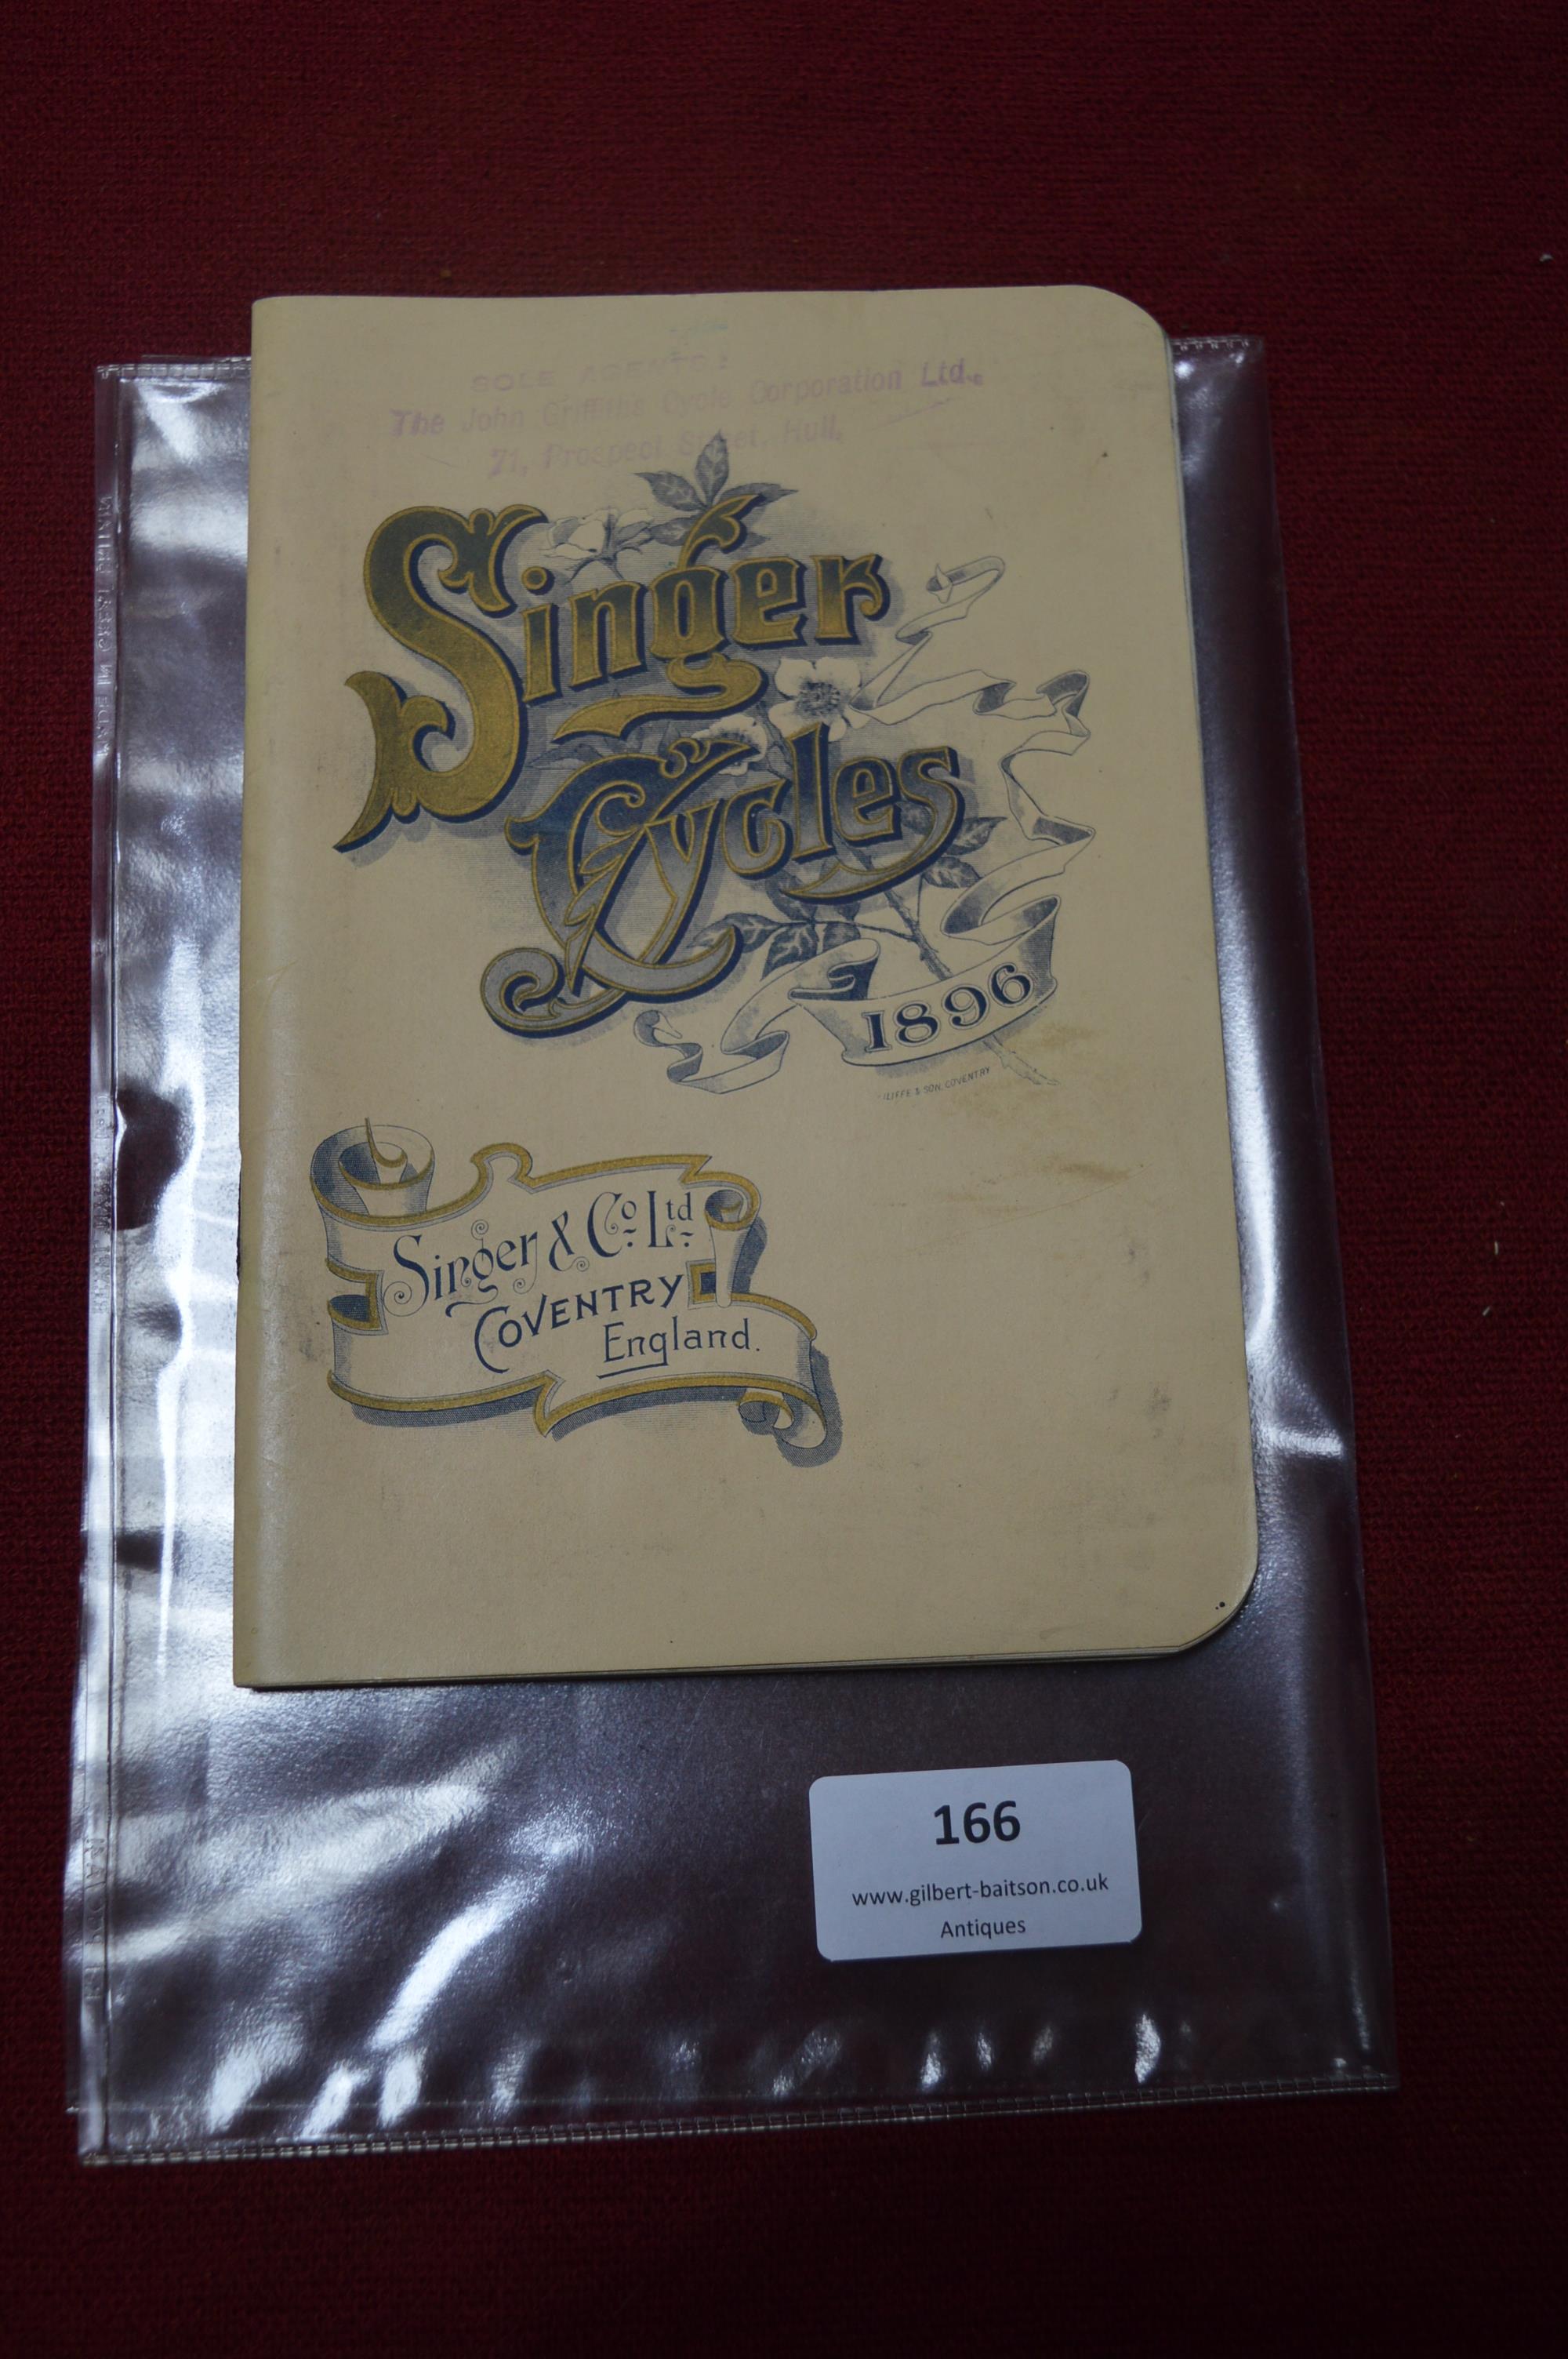 1896 Singer Cycles of Coventry Catalogue